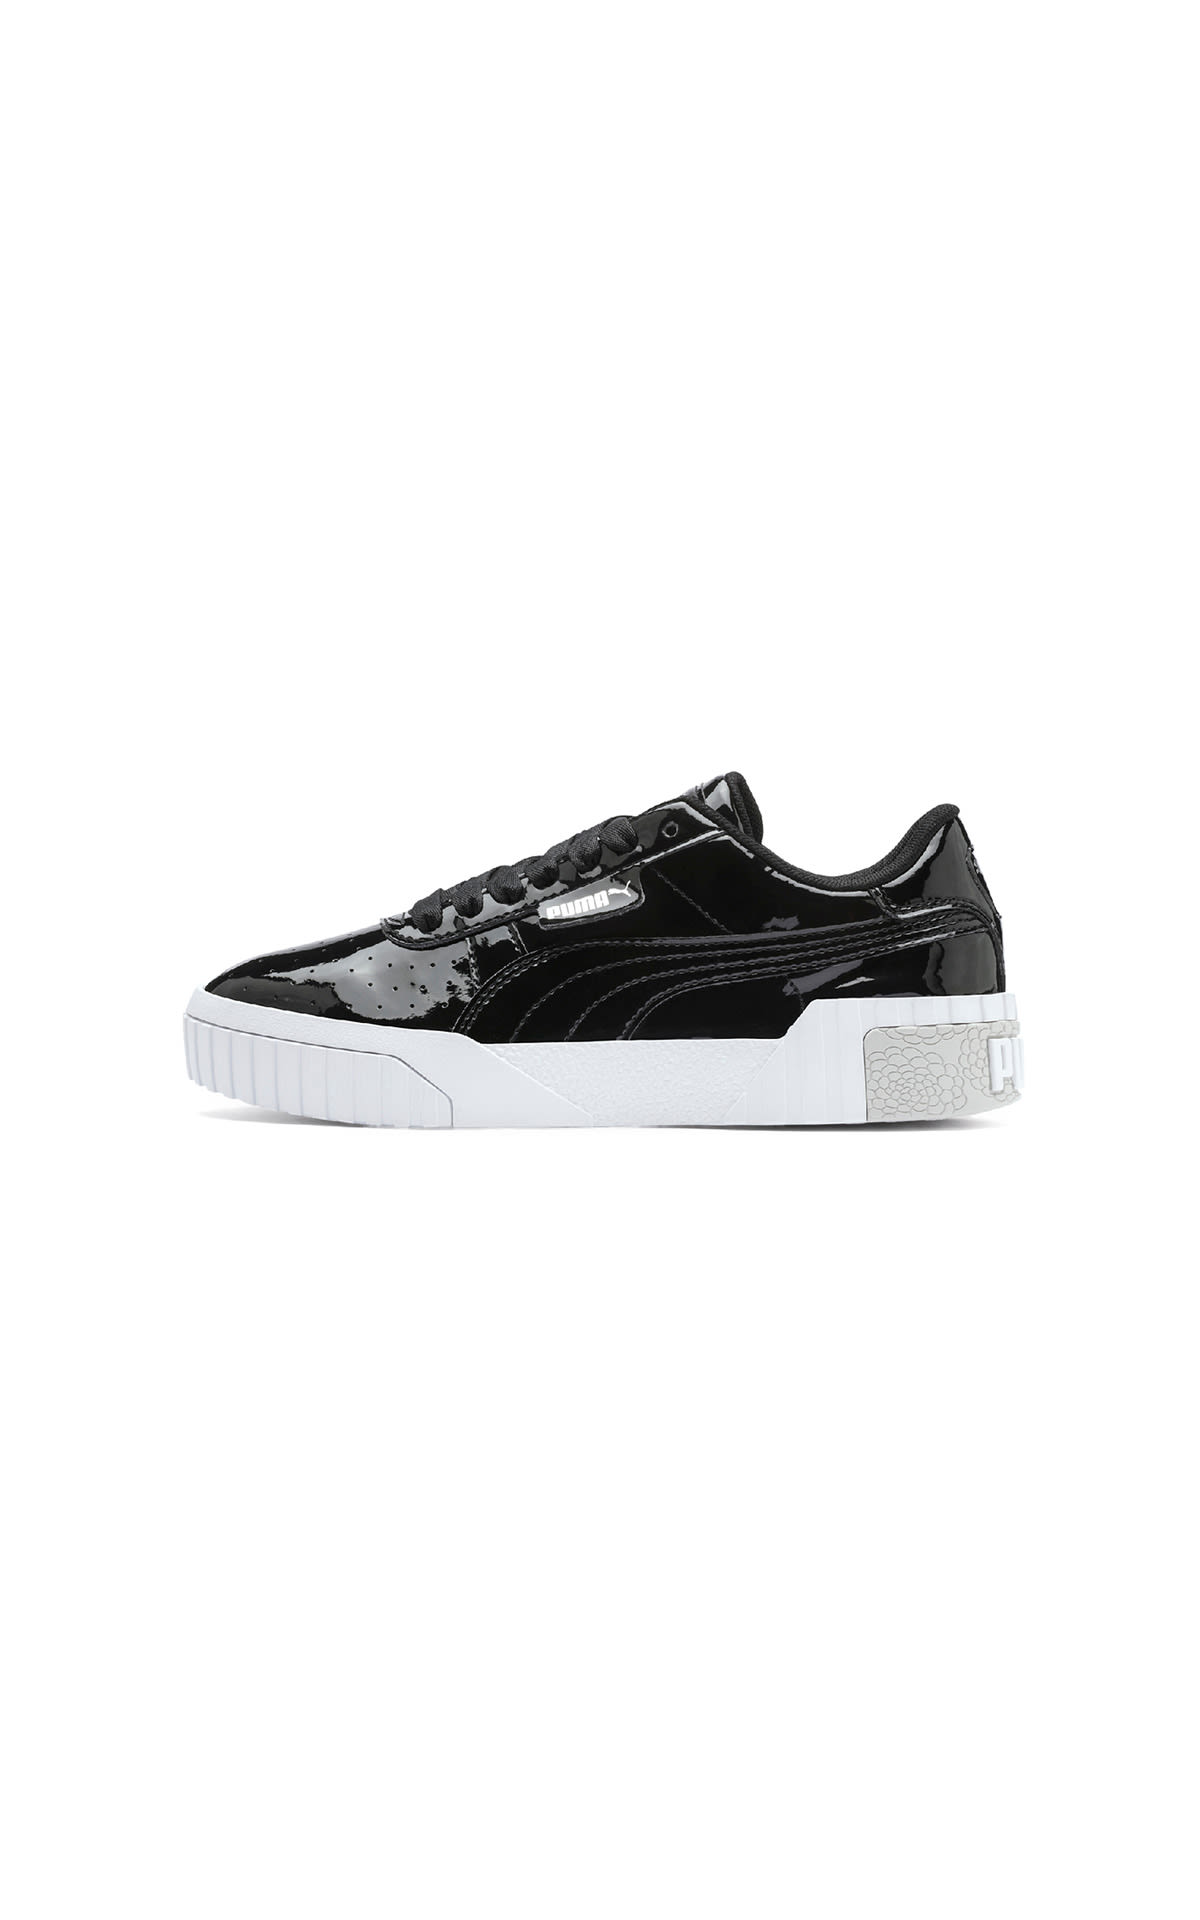 PUMA Cali patent junior in black and white at The Bicester Village Shopping Collection